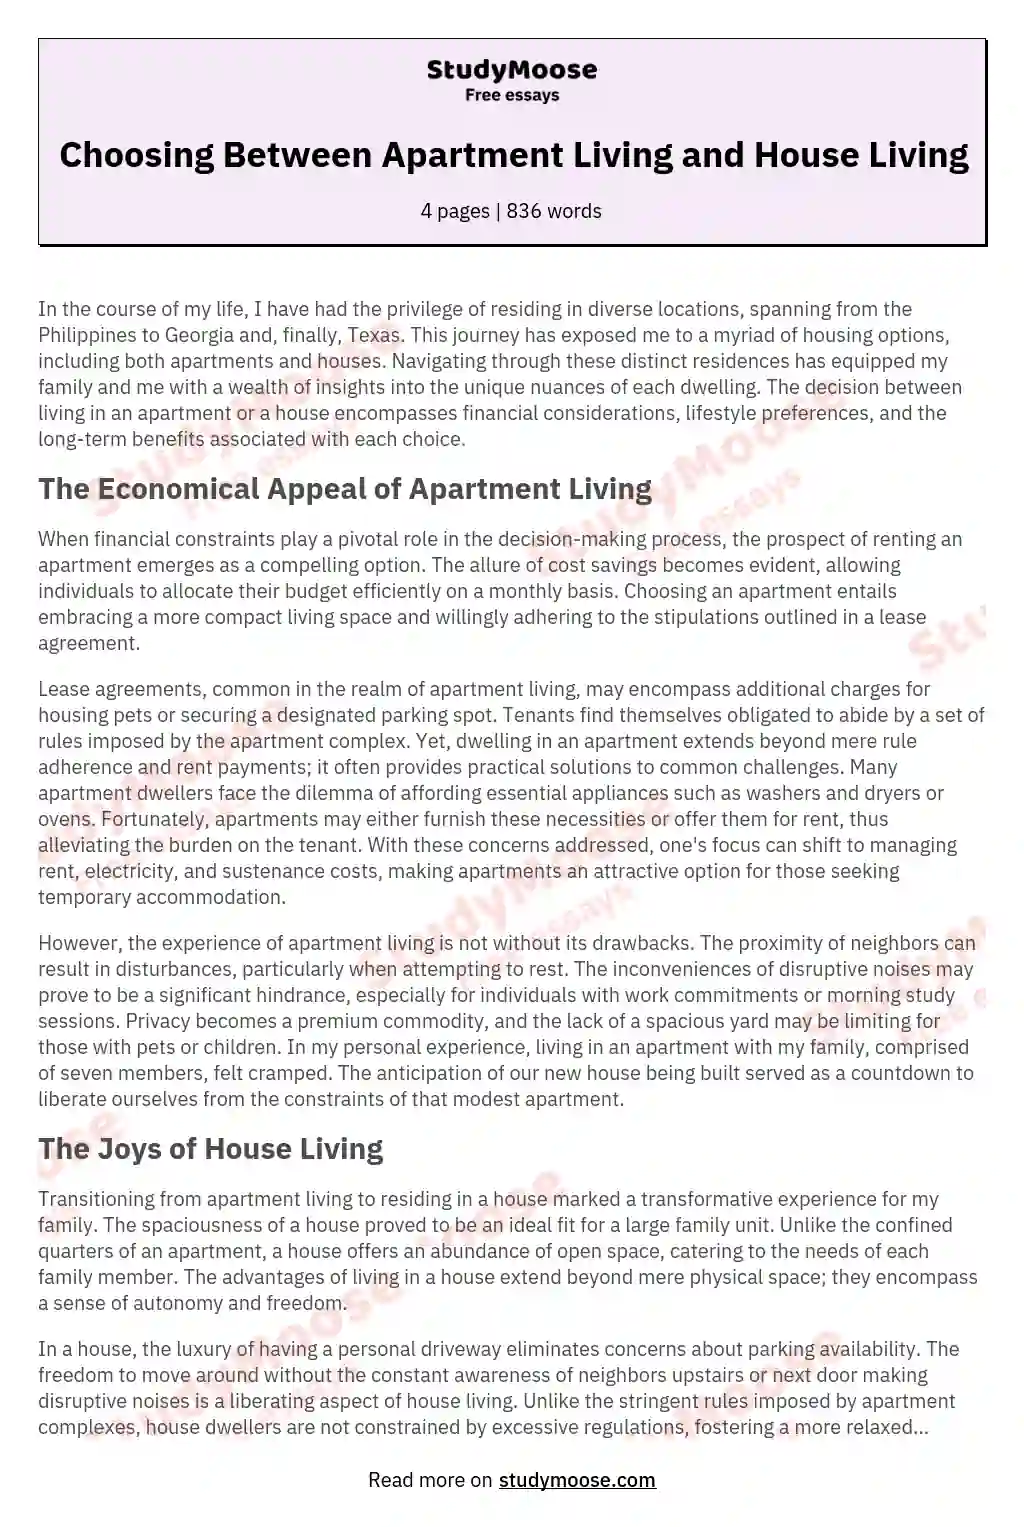 Choosing Between Apartment Living and House Living essay